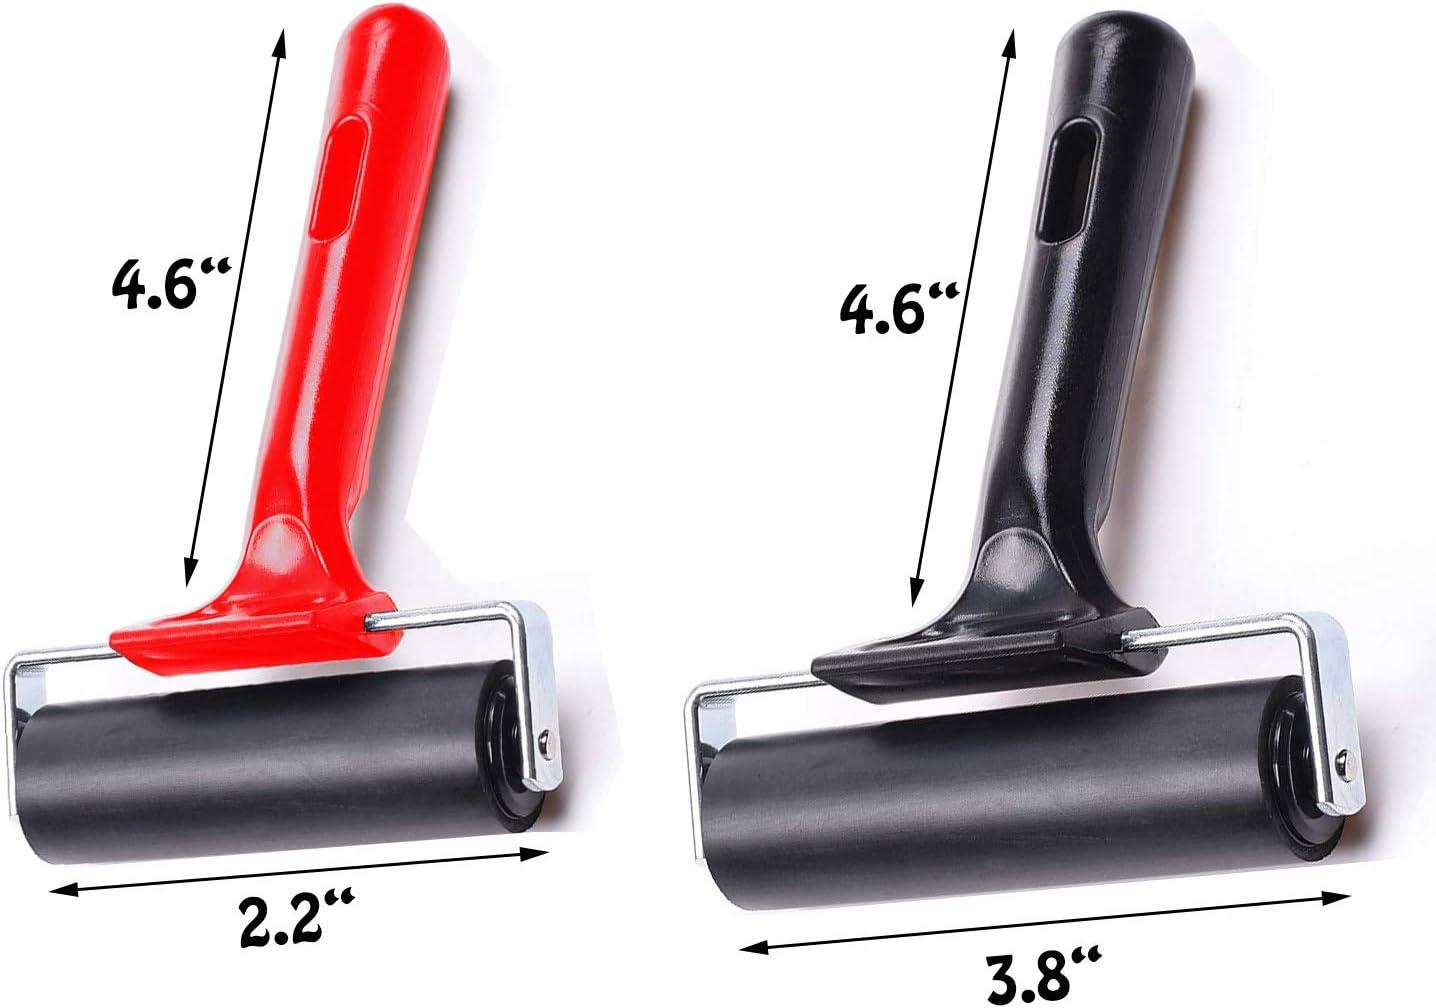 2 Pcs/2 Sizes Hard Rubber Brayer Roller for Printmaking/Crafts/Stamping  Gluing, TuNan Brayer Ink Roller Anti-Skid Tape Construction Tool - 3.8 &  2.2 (Large/Black, Small/Red)